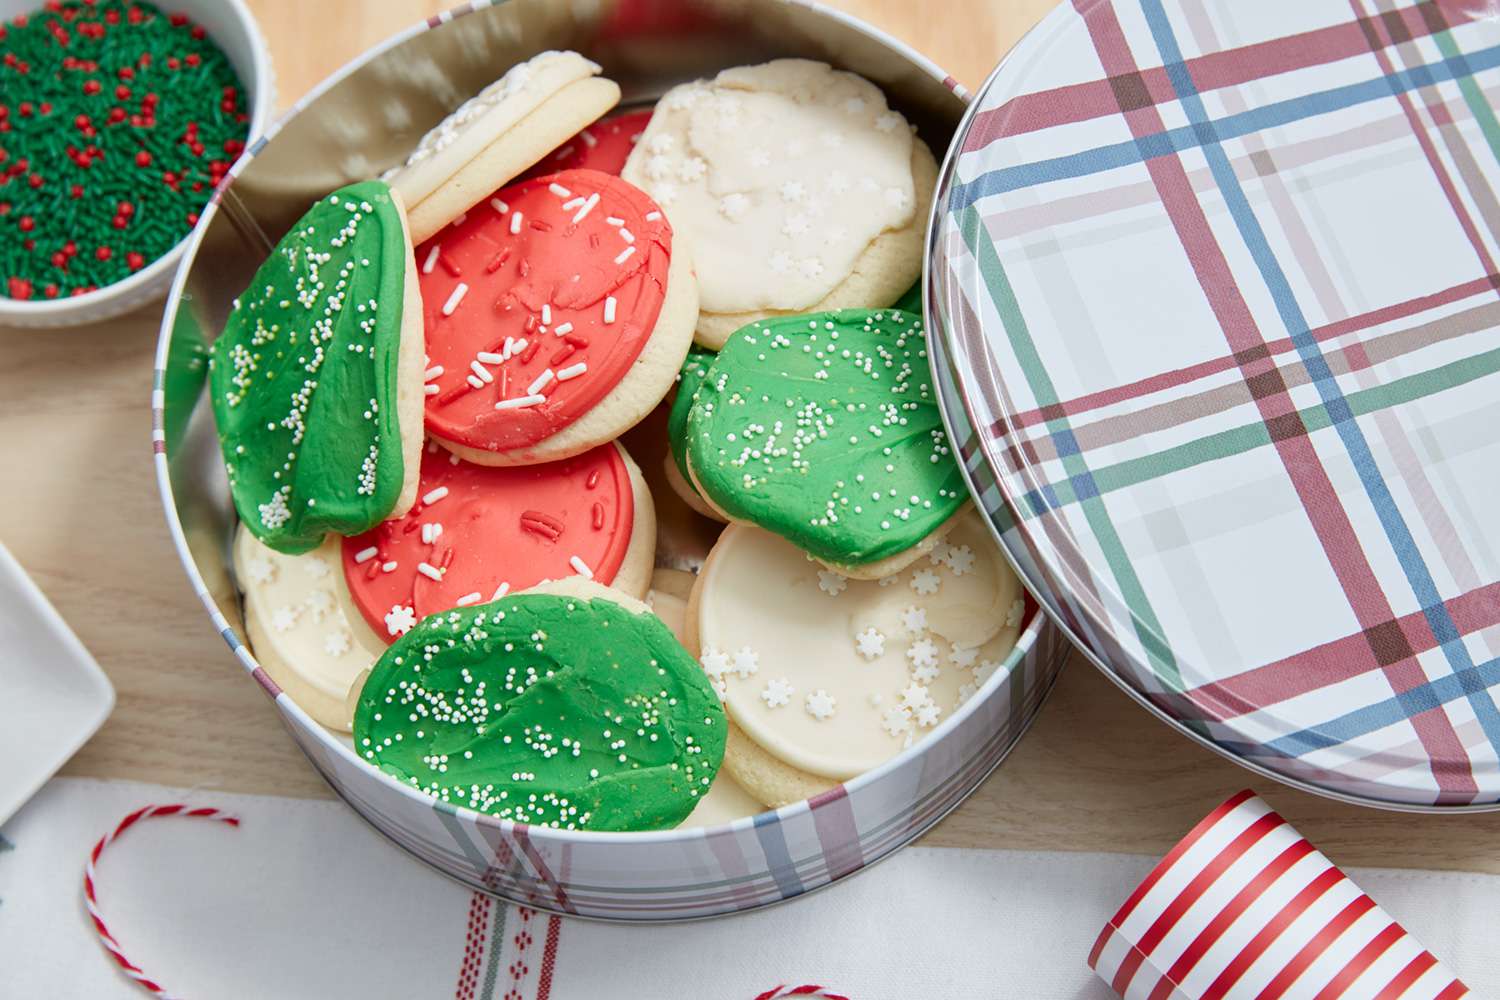 Can of Christmas cookies